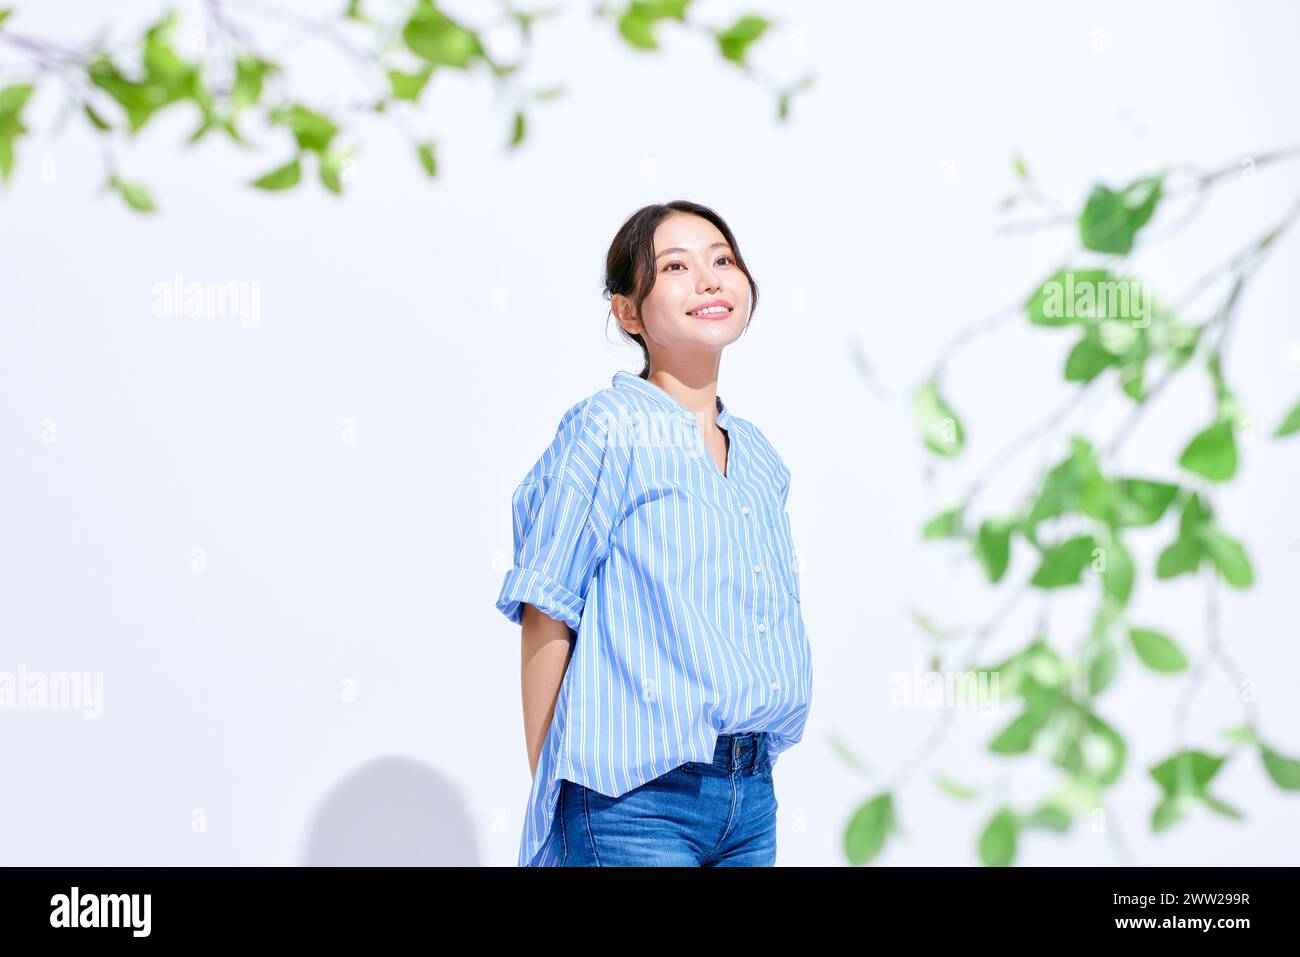 Asian woman in blue shirt and jeans standing in front of green tree Stock Photo